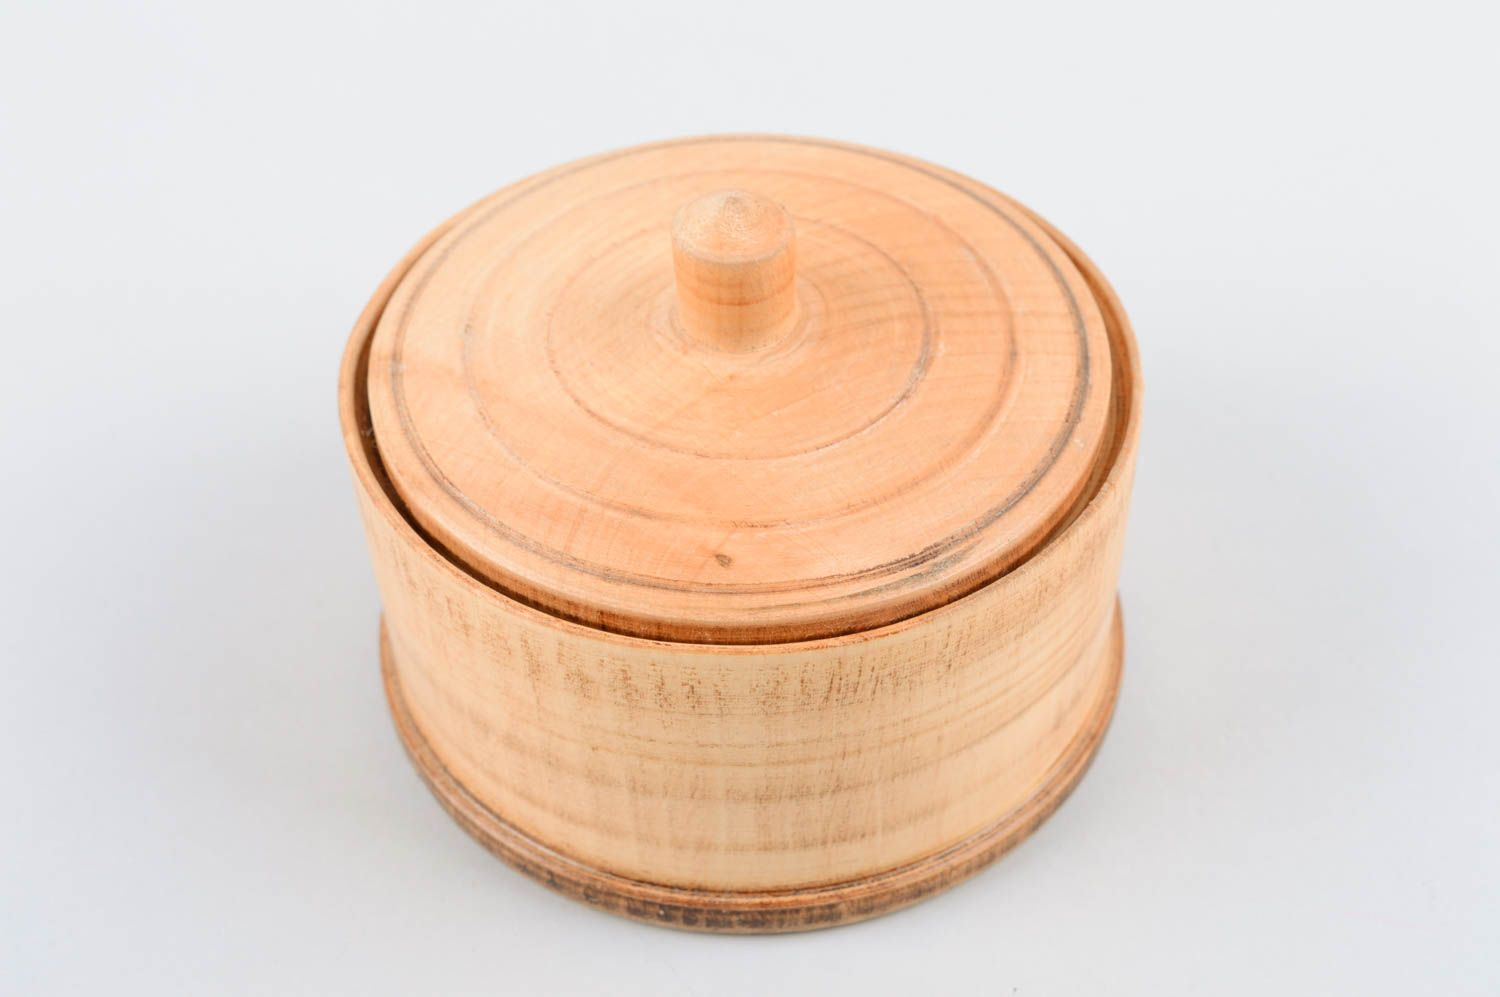 10 oz wooden decorative container with lid 0,34 lb photo 3